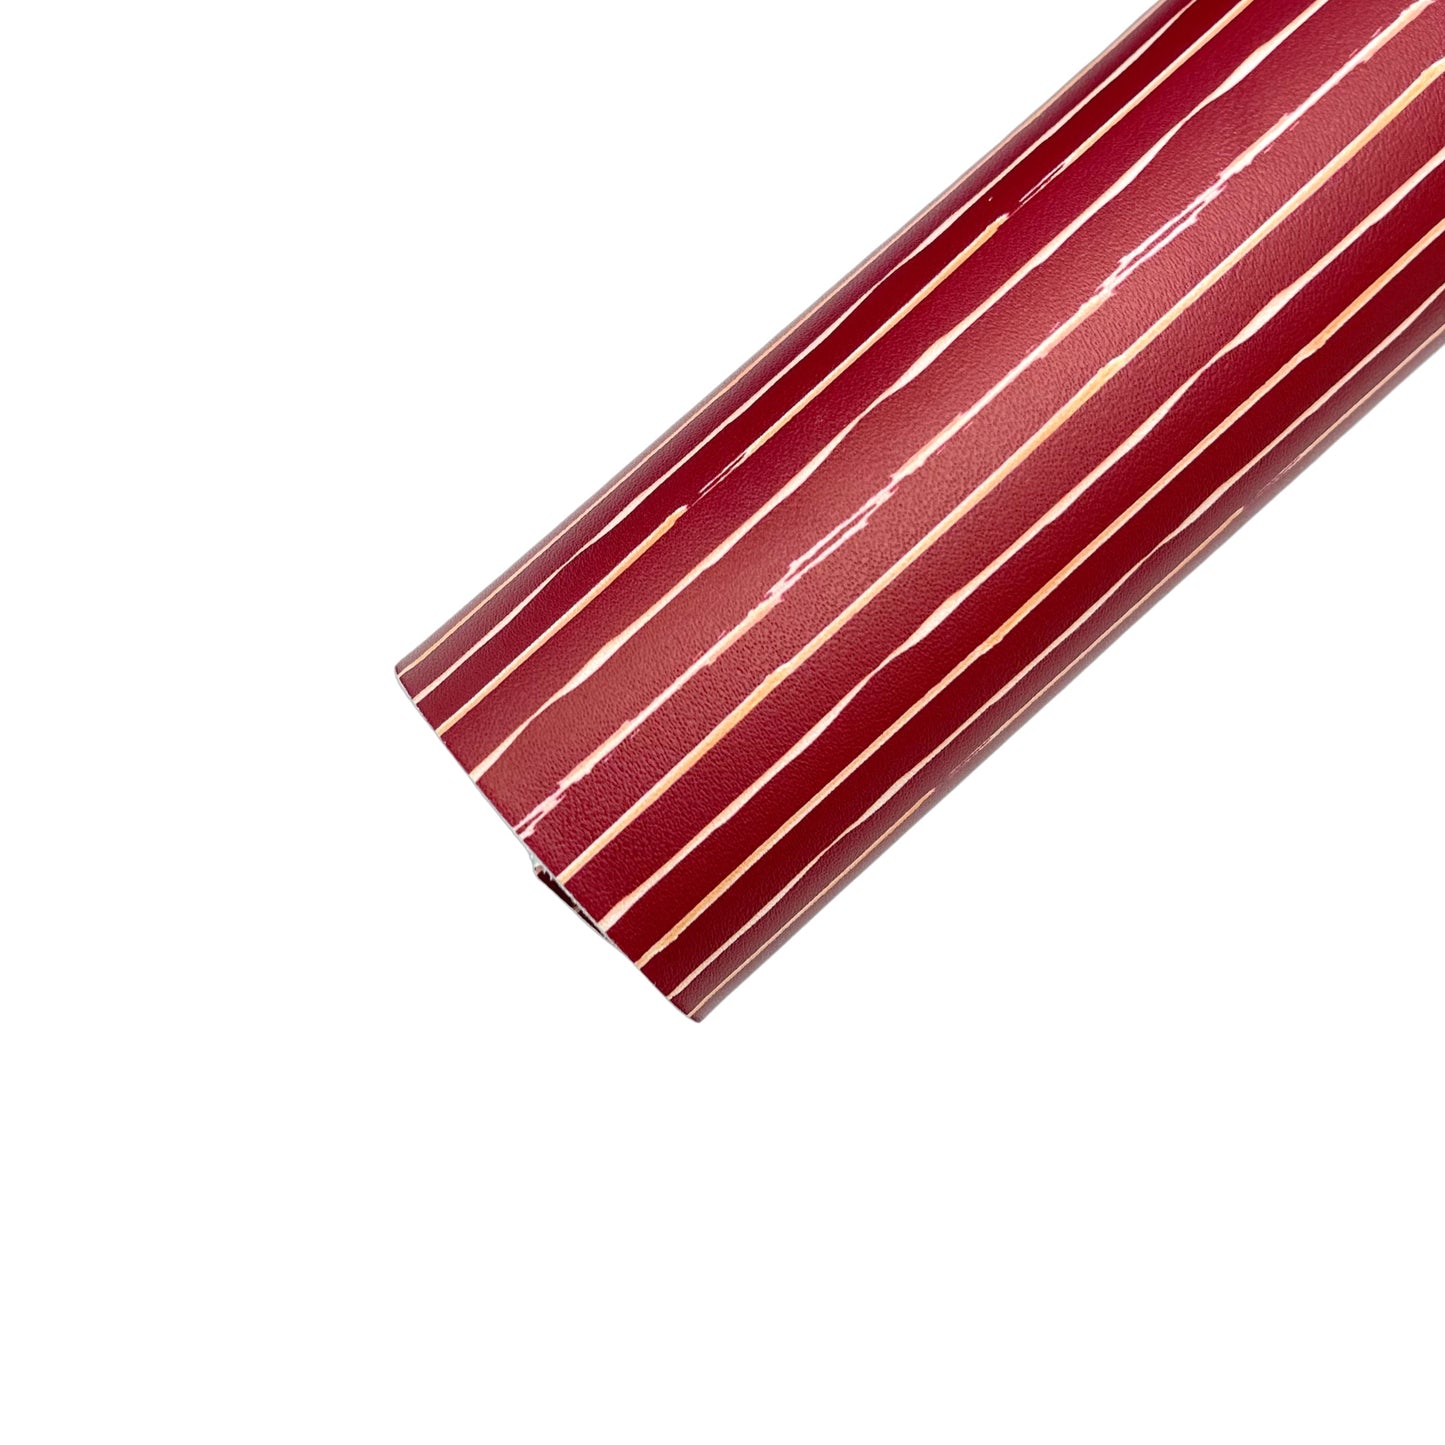 Rolled maroon faux leather sheet with light orange thin paint stripes.